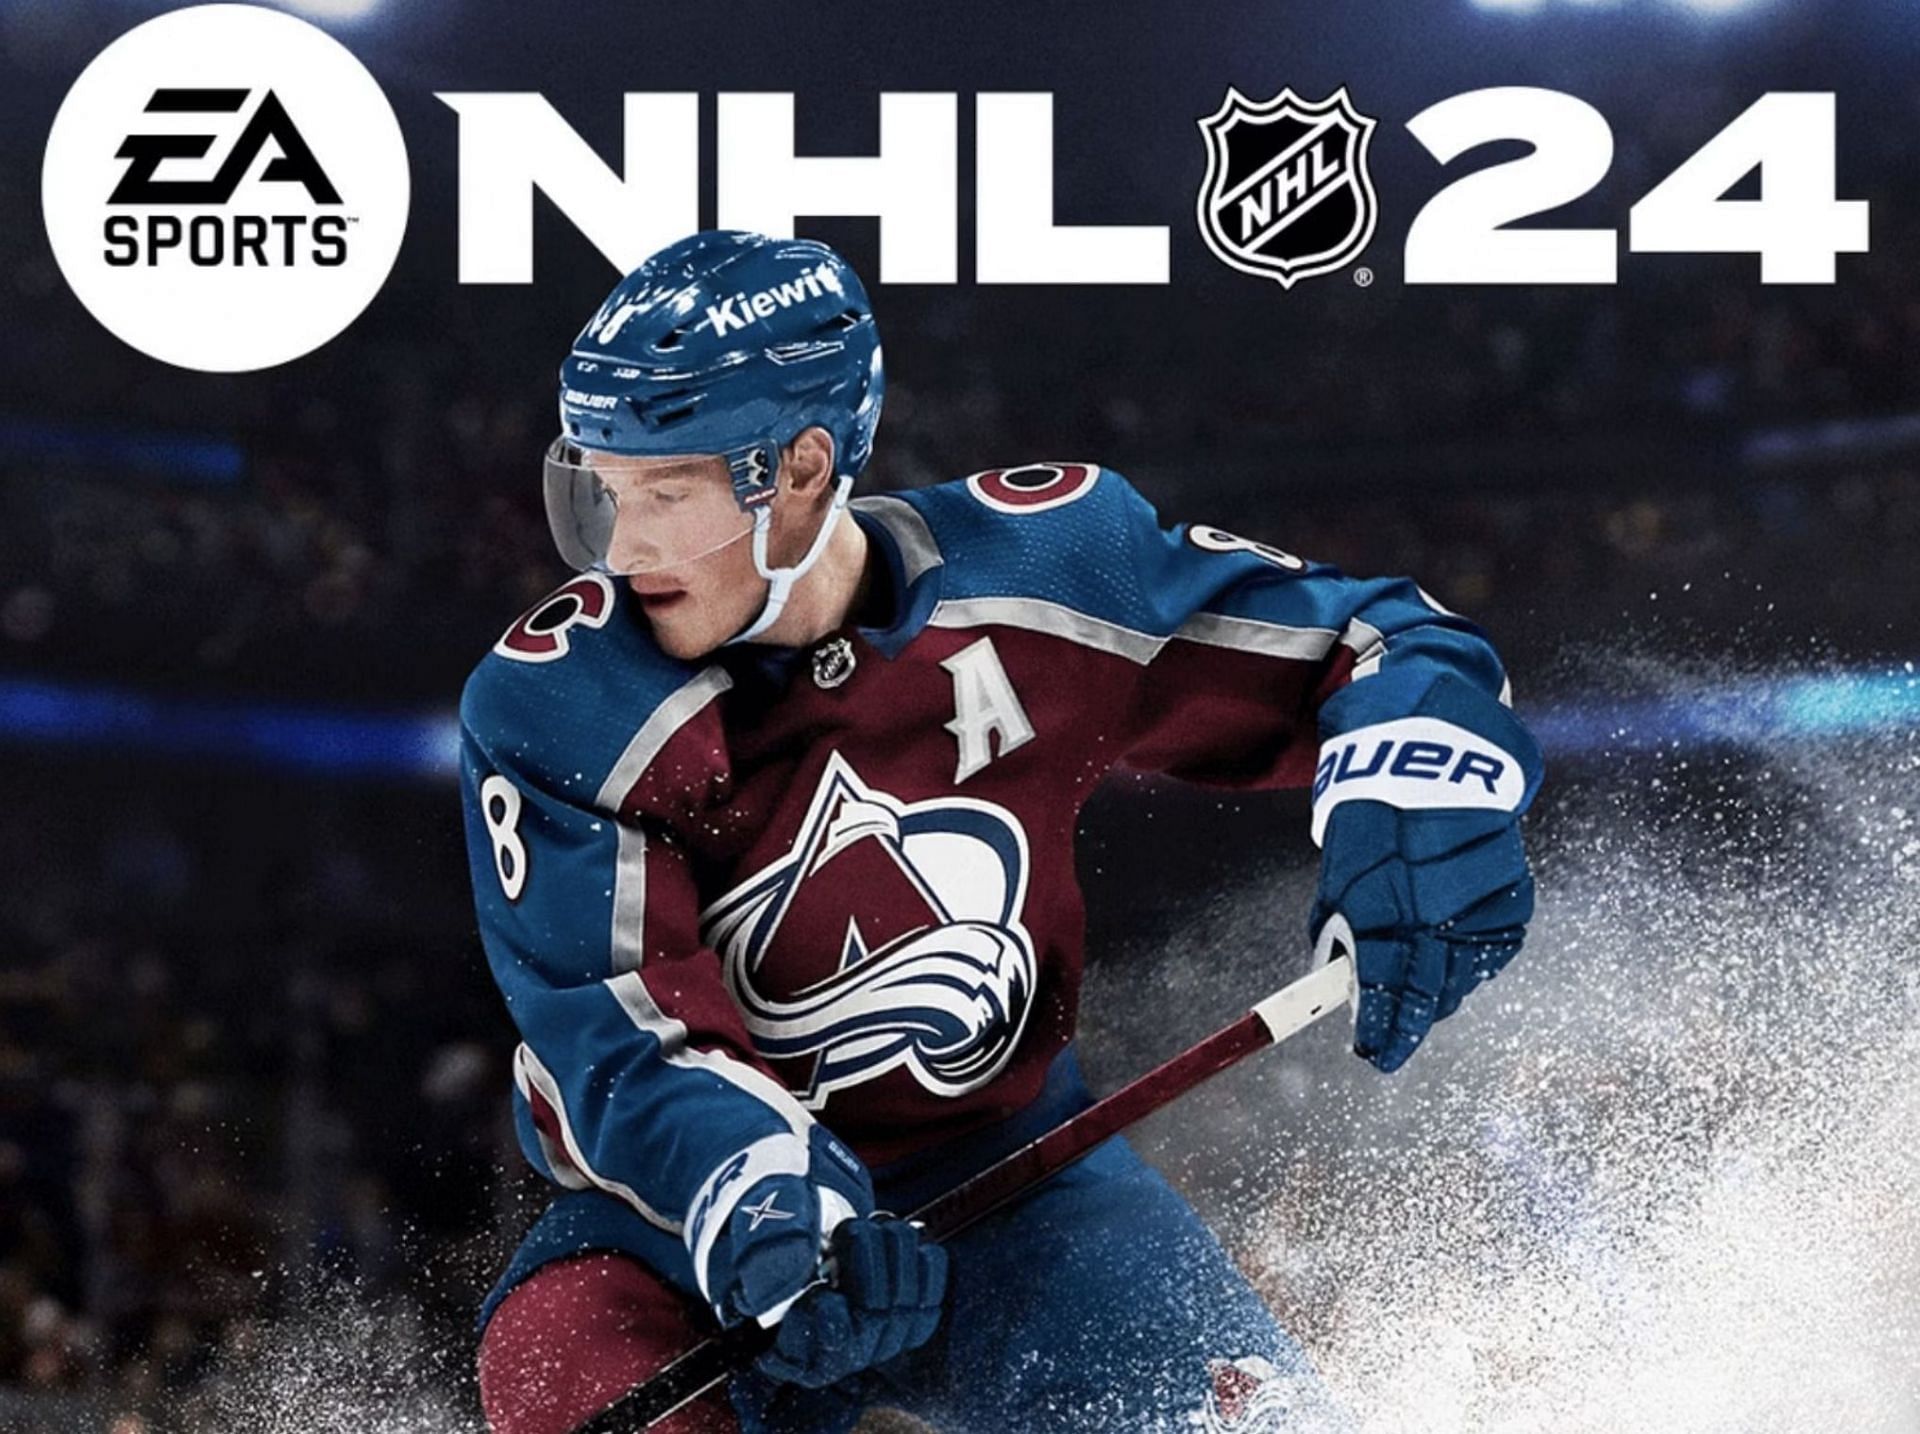 NHL 24 Player Ratings: Highest rated centers, wingers, defensemen &amp; goalies in latest Chel edition